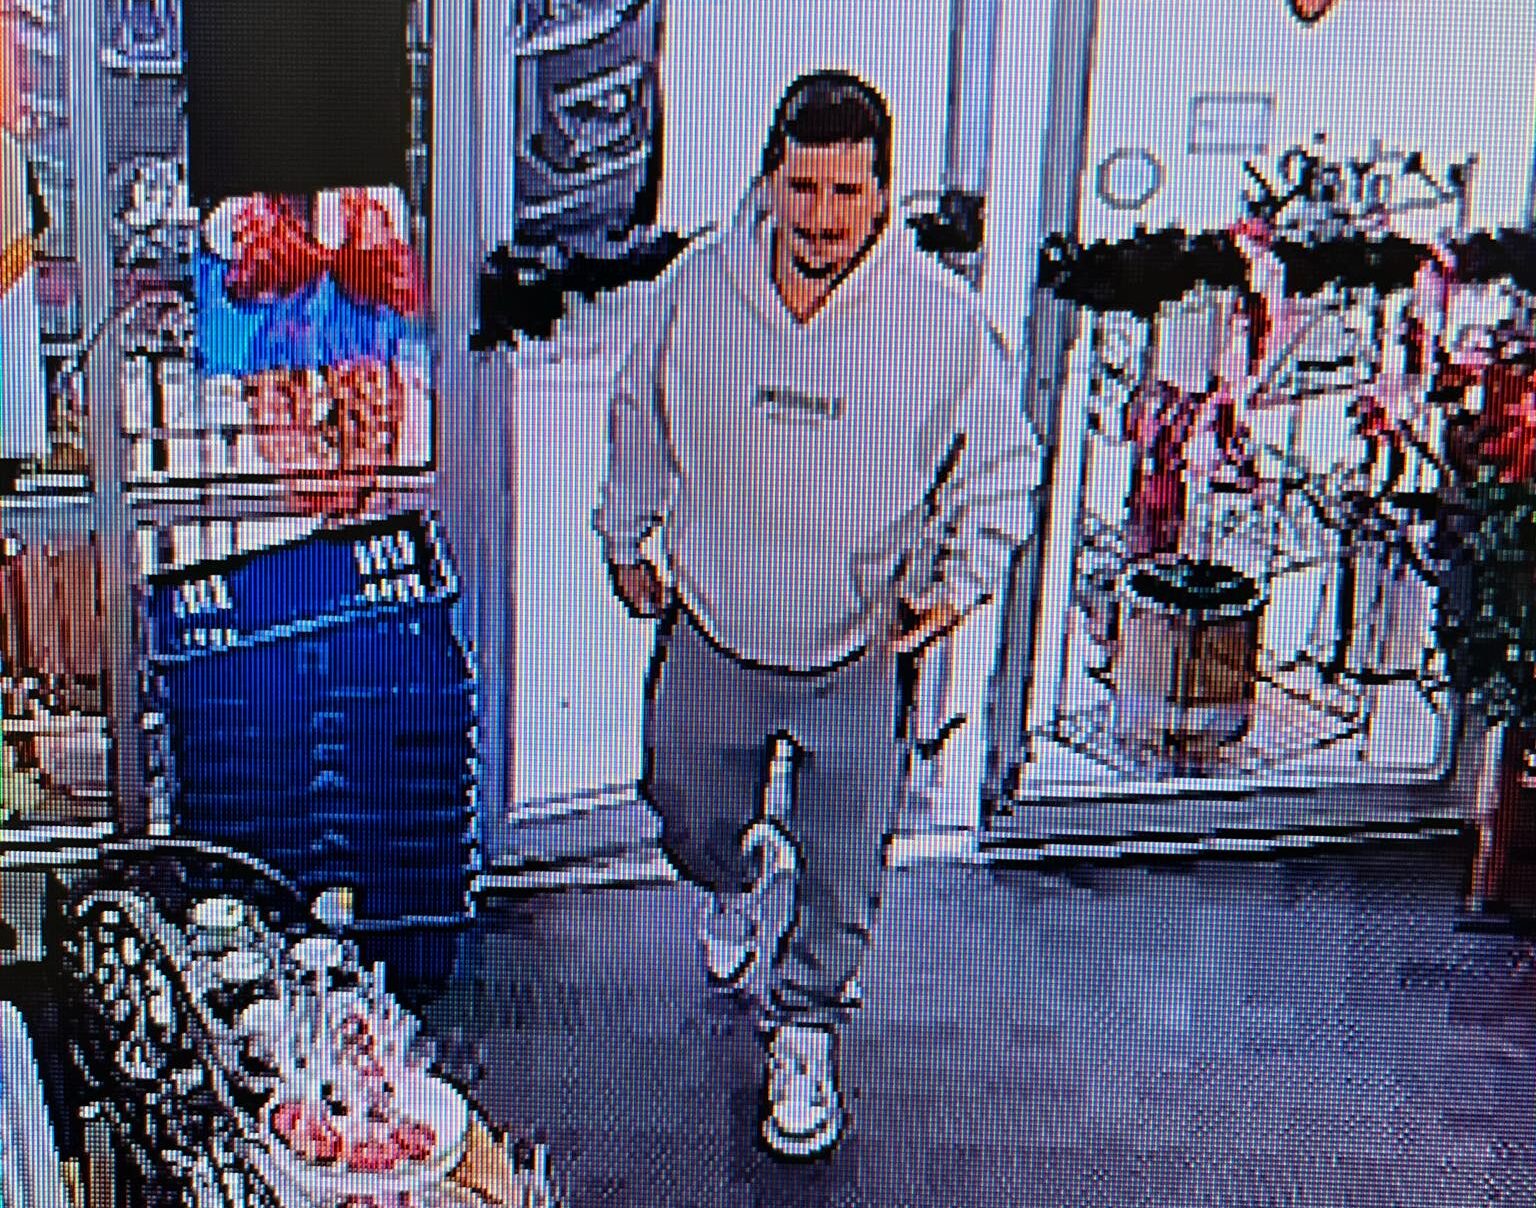 A CCTV still showing one of the alleged card thieves, now identified to be Brooks Allen Clinton. Image Source: Champaign Sports Cards